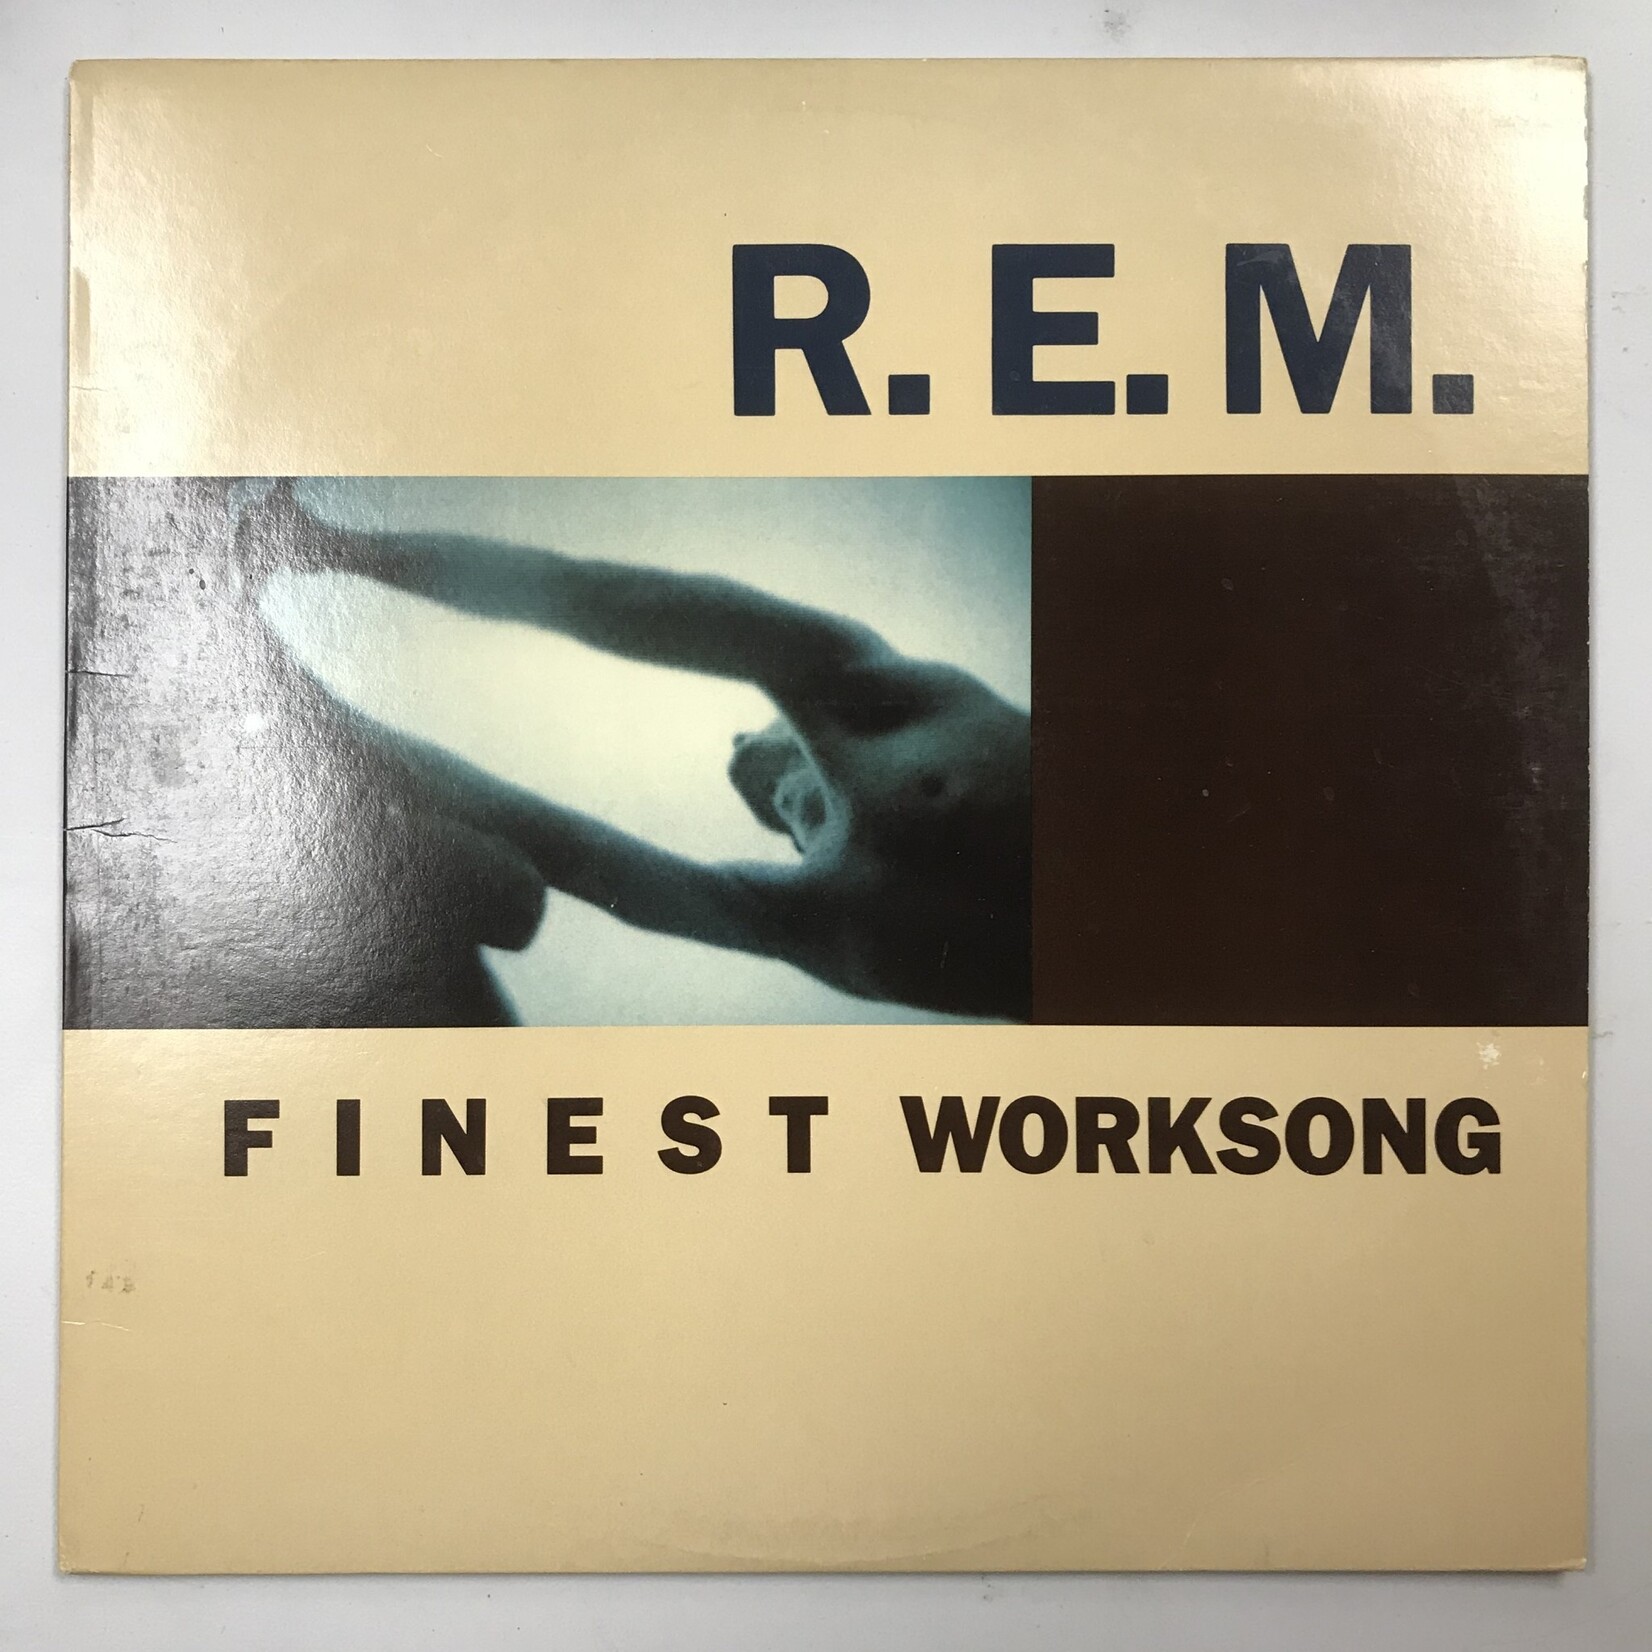 R.E.M. - Finest Worksong / Time After Time - Vinyl 12-Inch Single (USED)